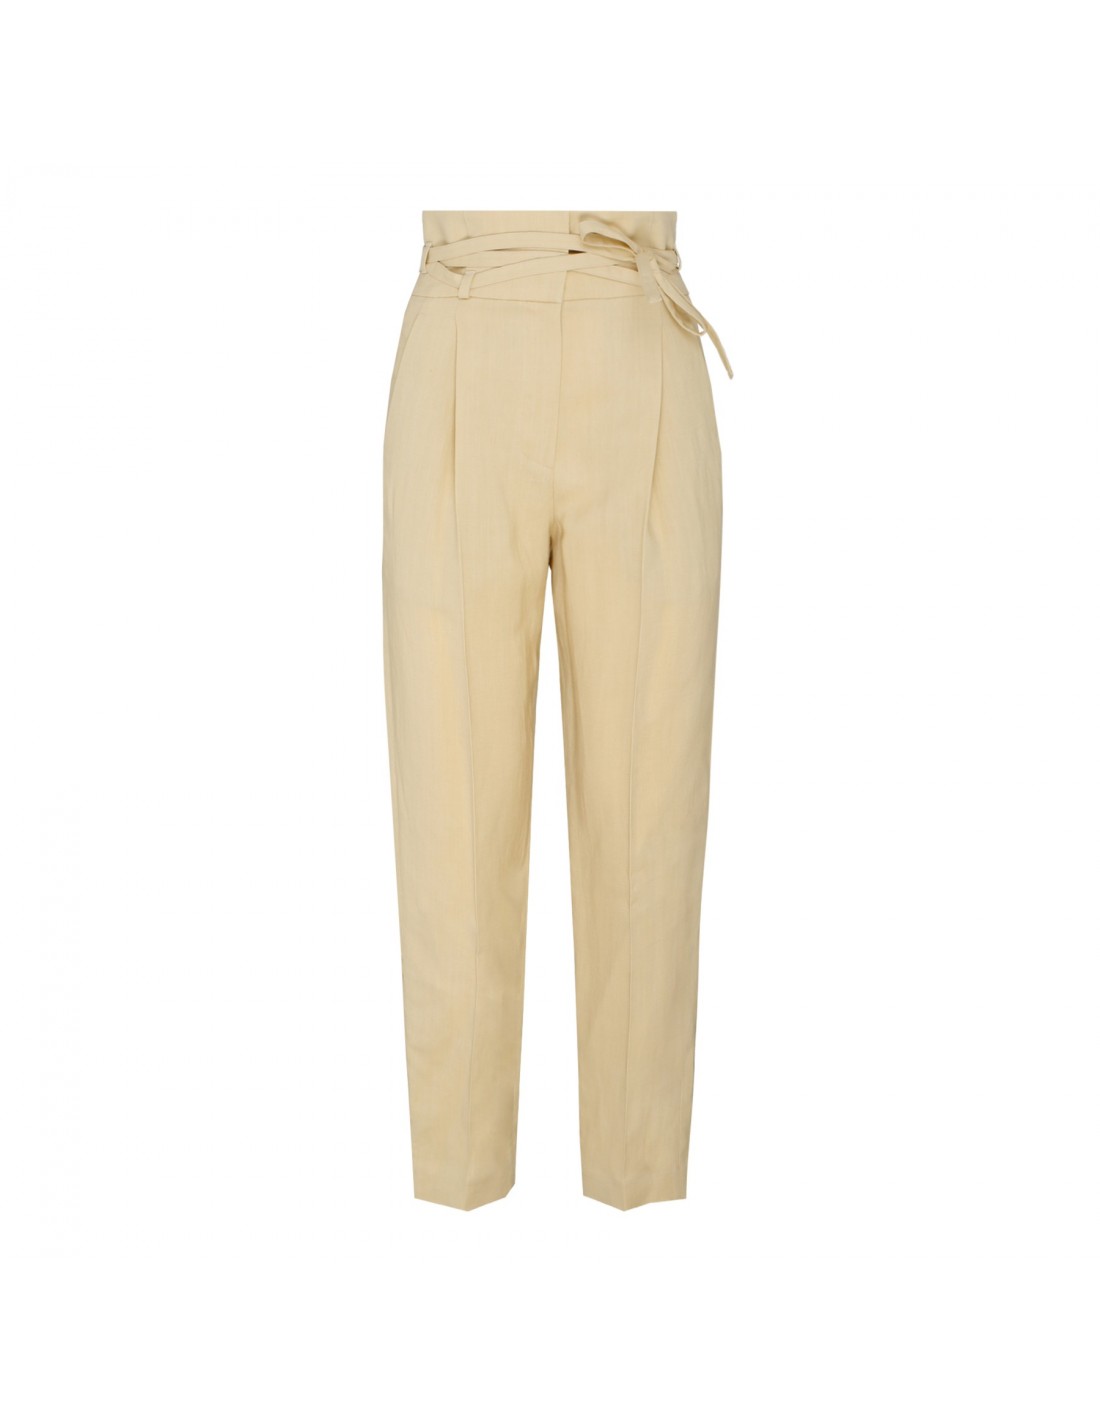 Taupe viscose and linen blend pants